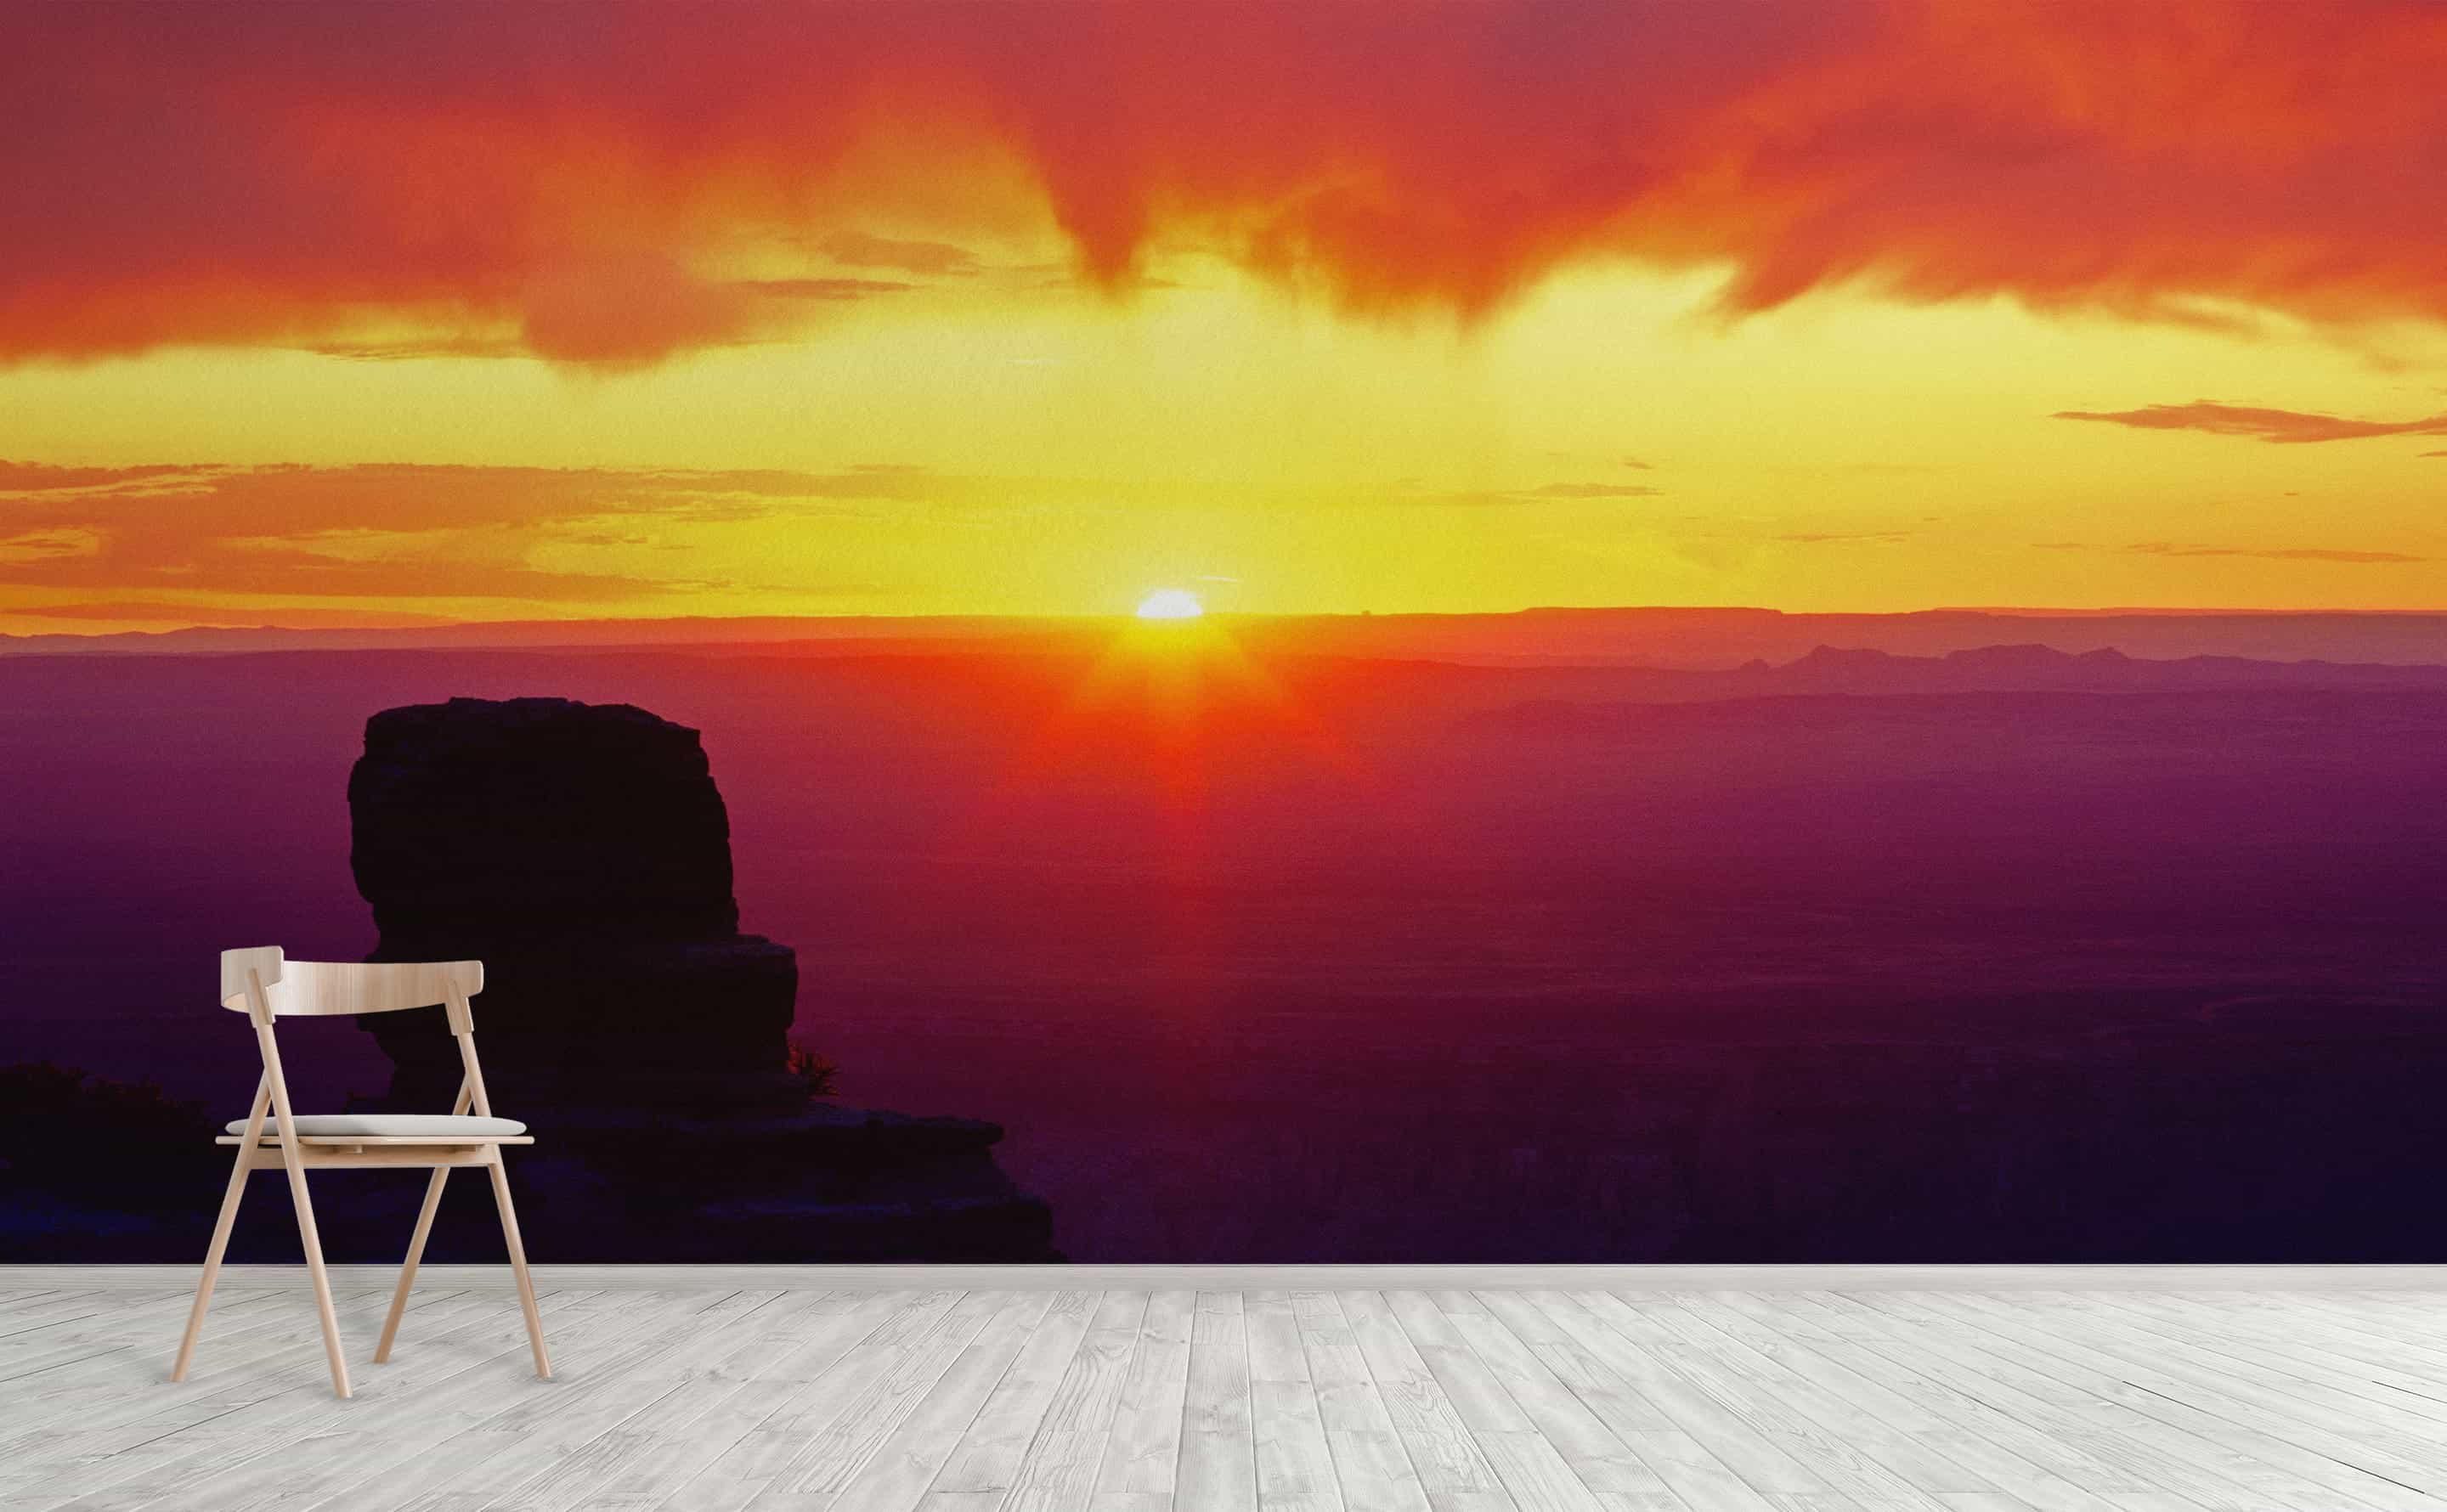 Sunrise Over Grand Canyon Wall Mural by Walls Need Love®